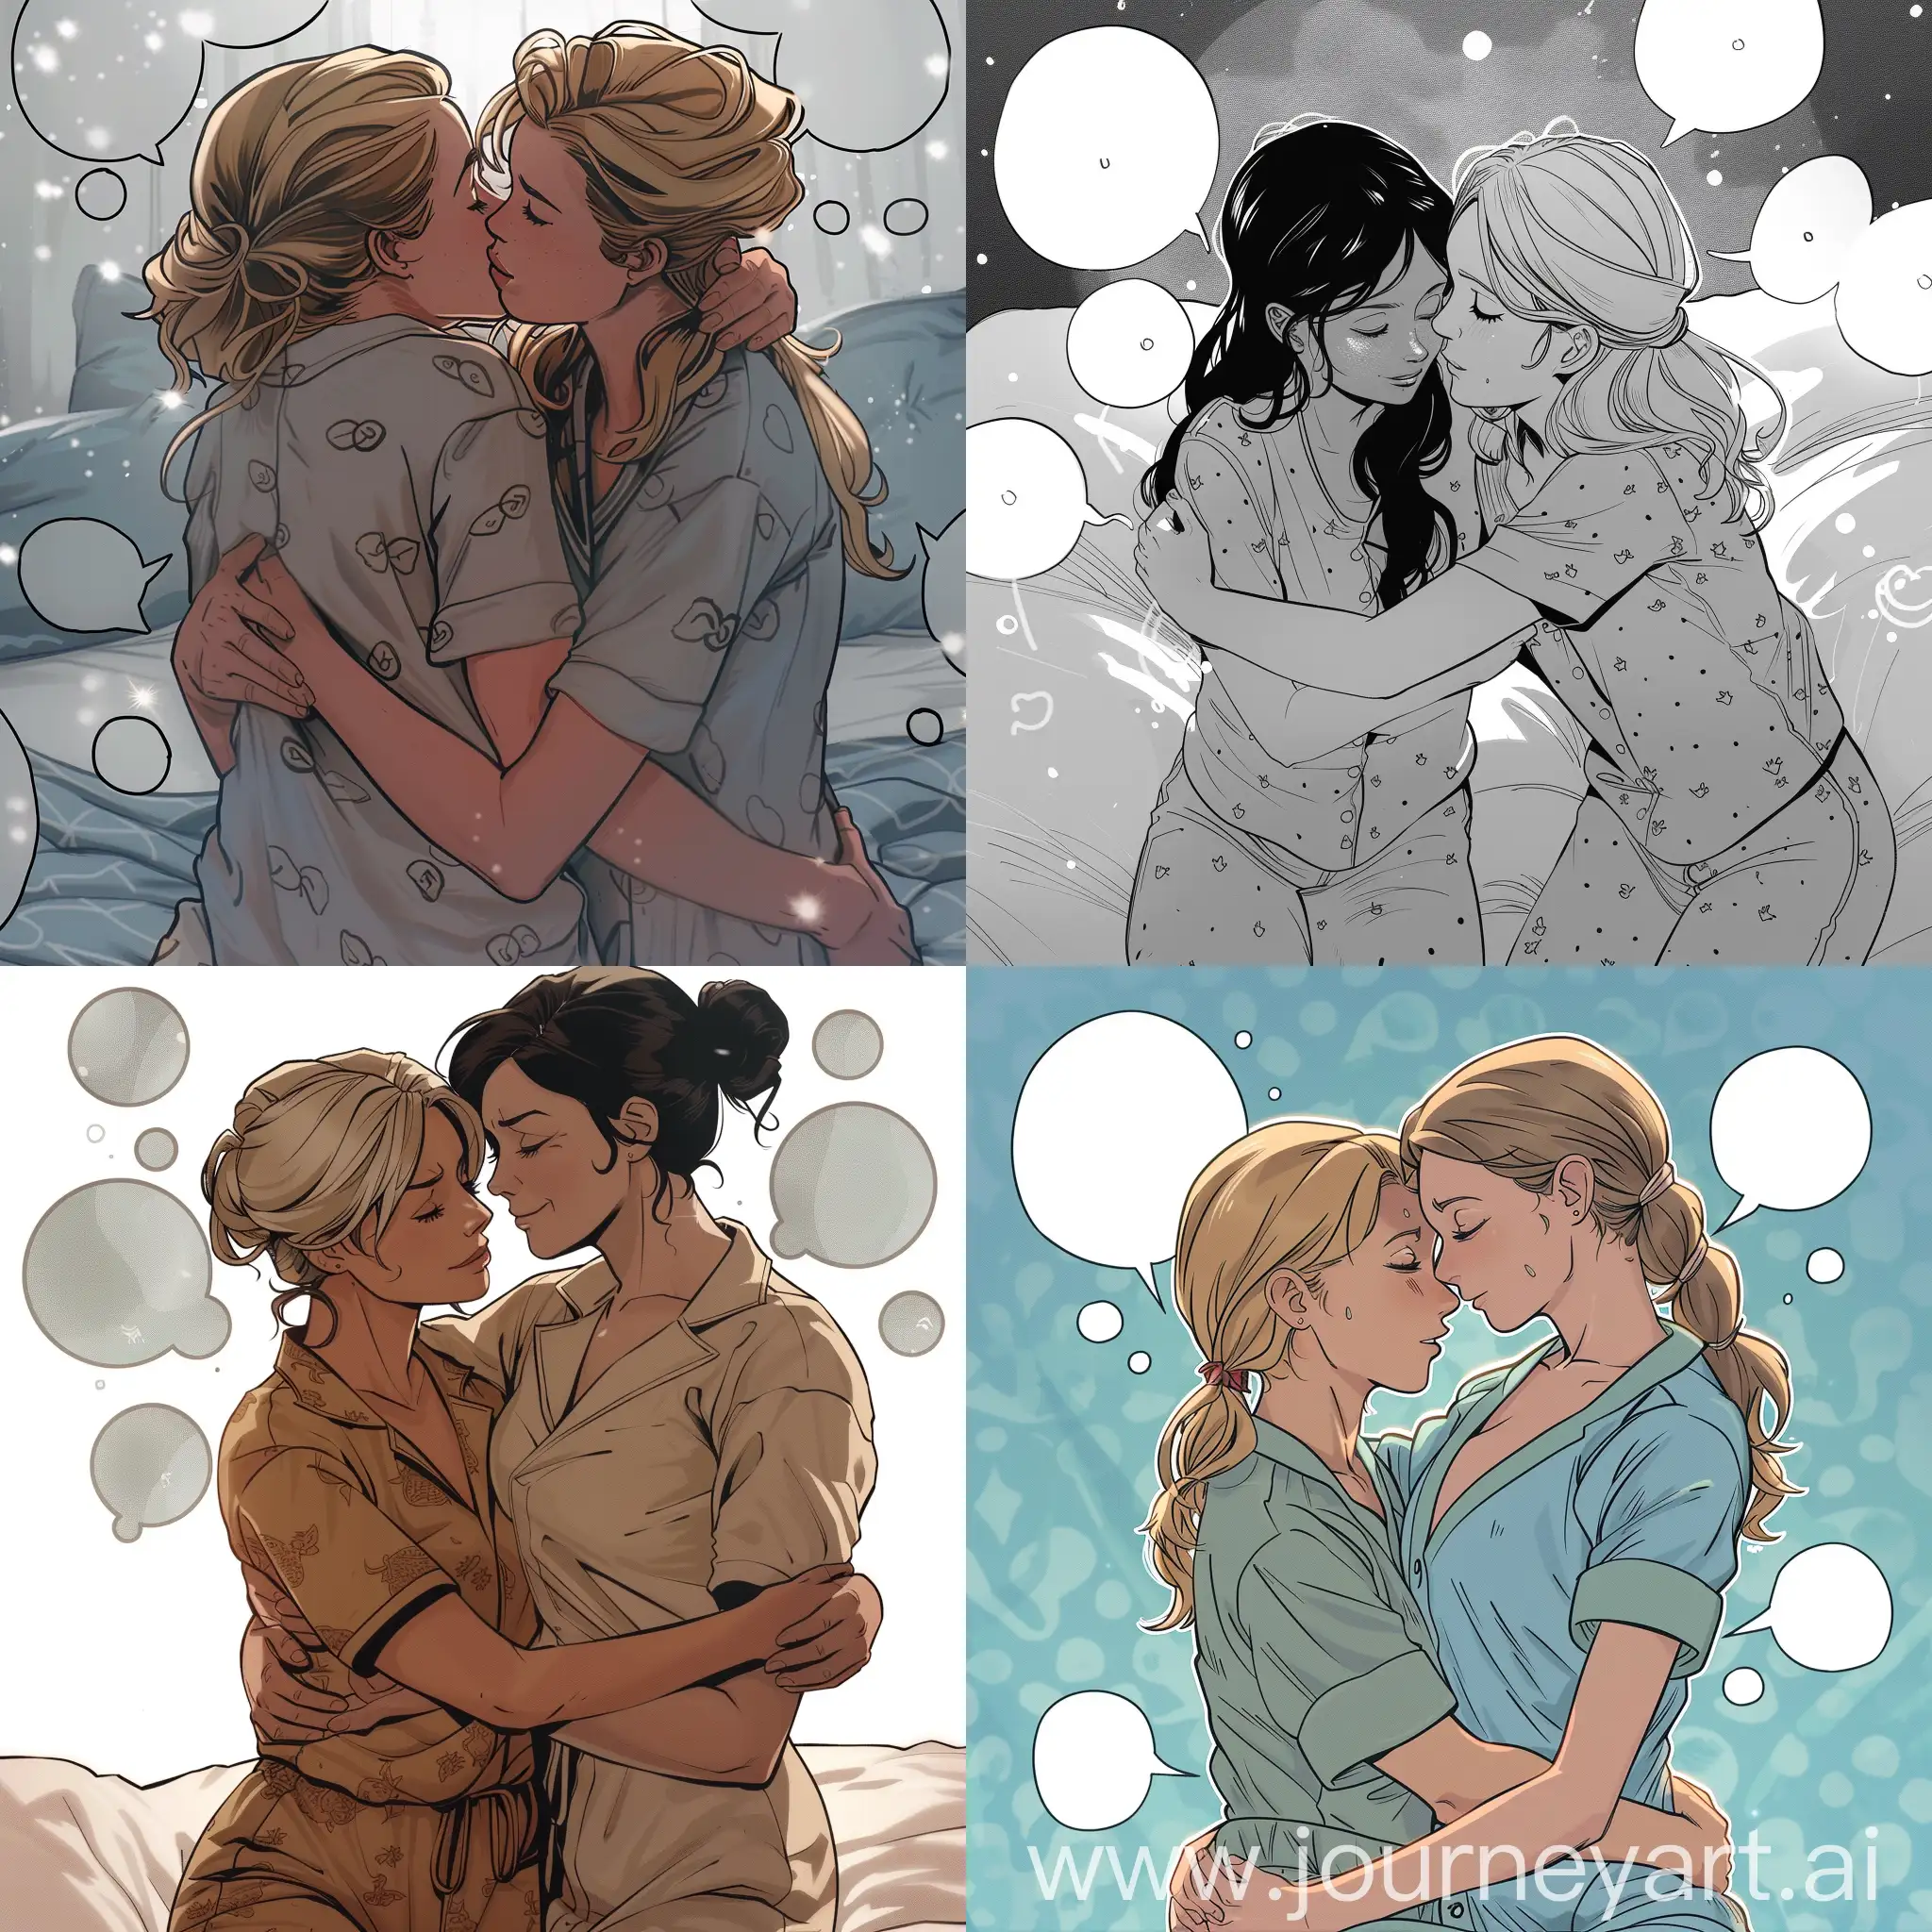 Young-Lesbian-Couple-Cuddling-in-French-Comic-Book-Inspired-Pajamas